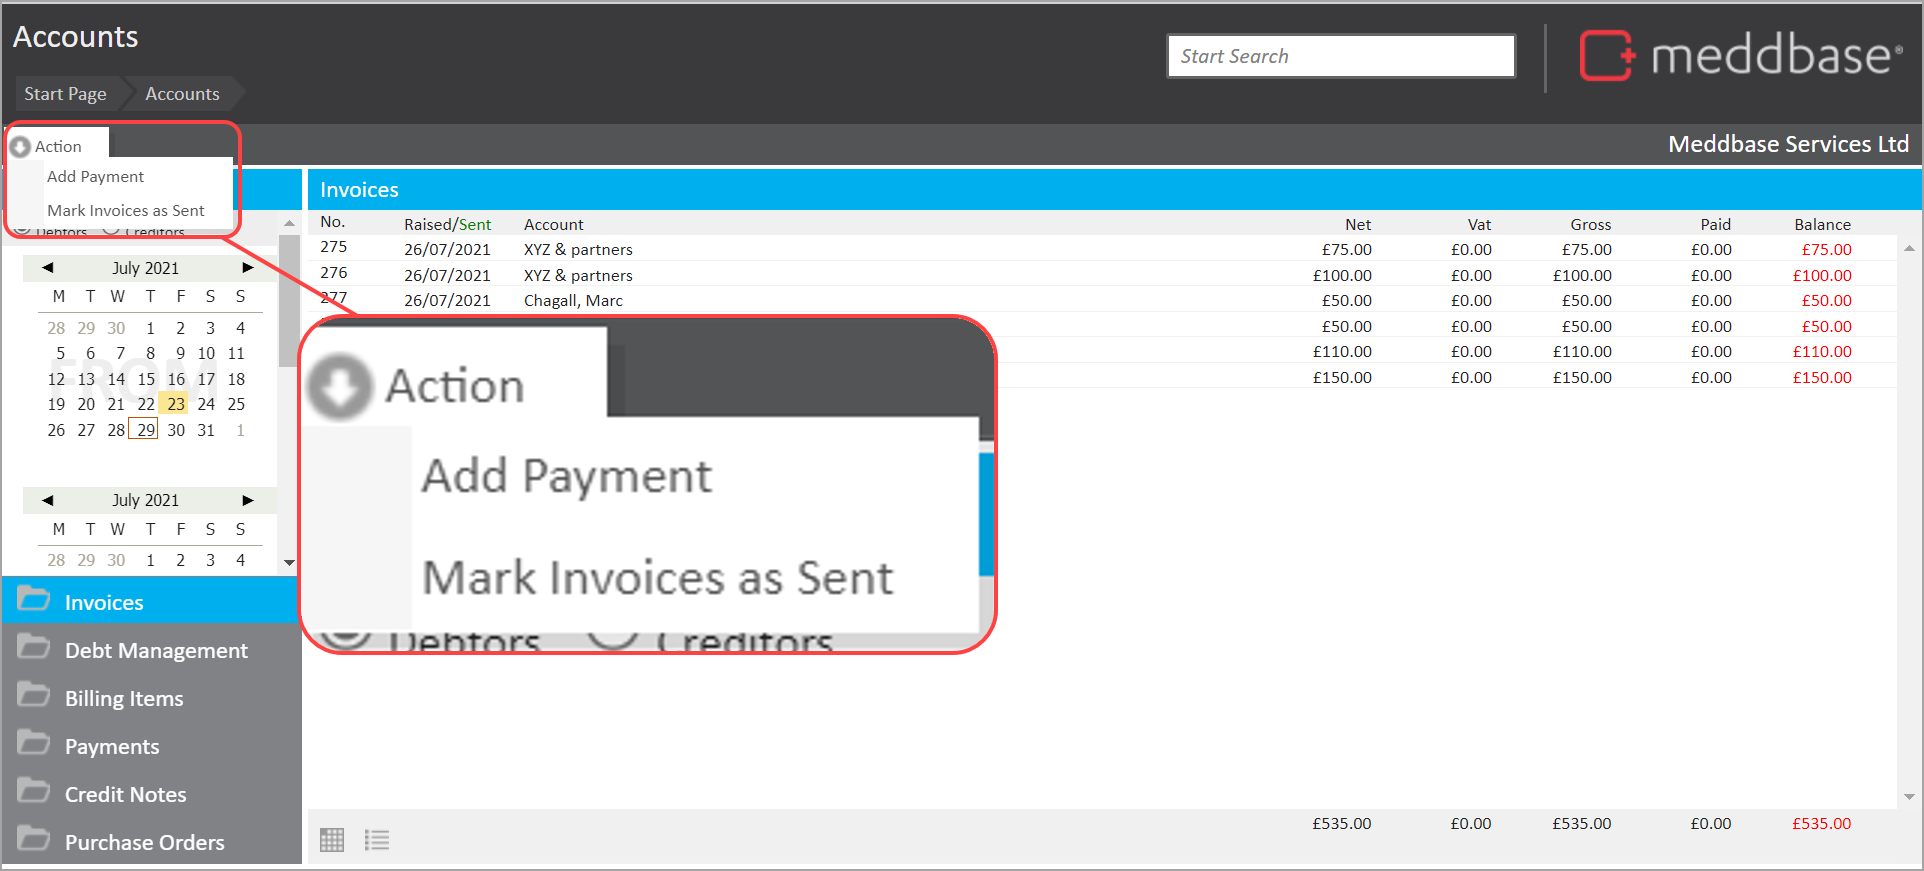 9a_-_Accounts_page_-_Invoice_section_showing_magnified_menu_for_Add_payment_and_Mark_invoices_as_sent.png